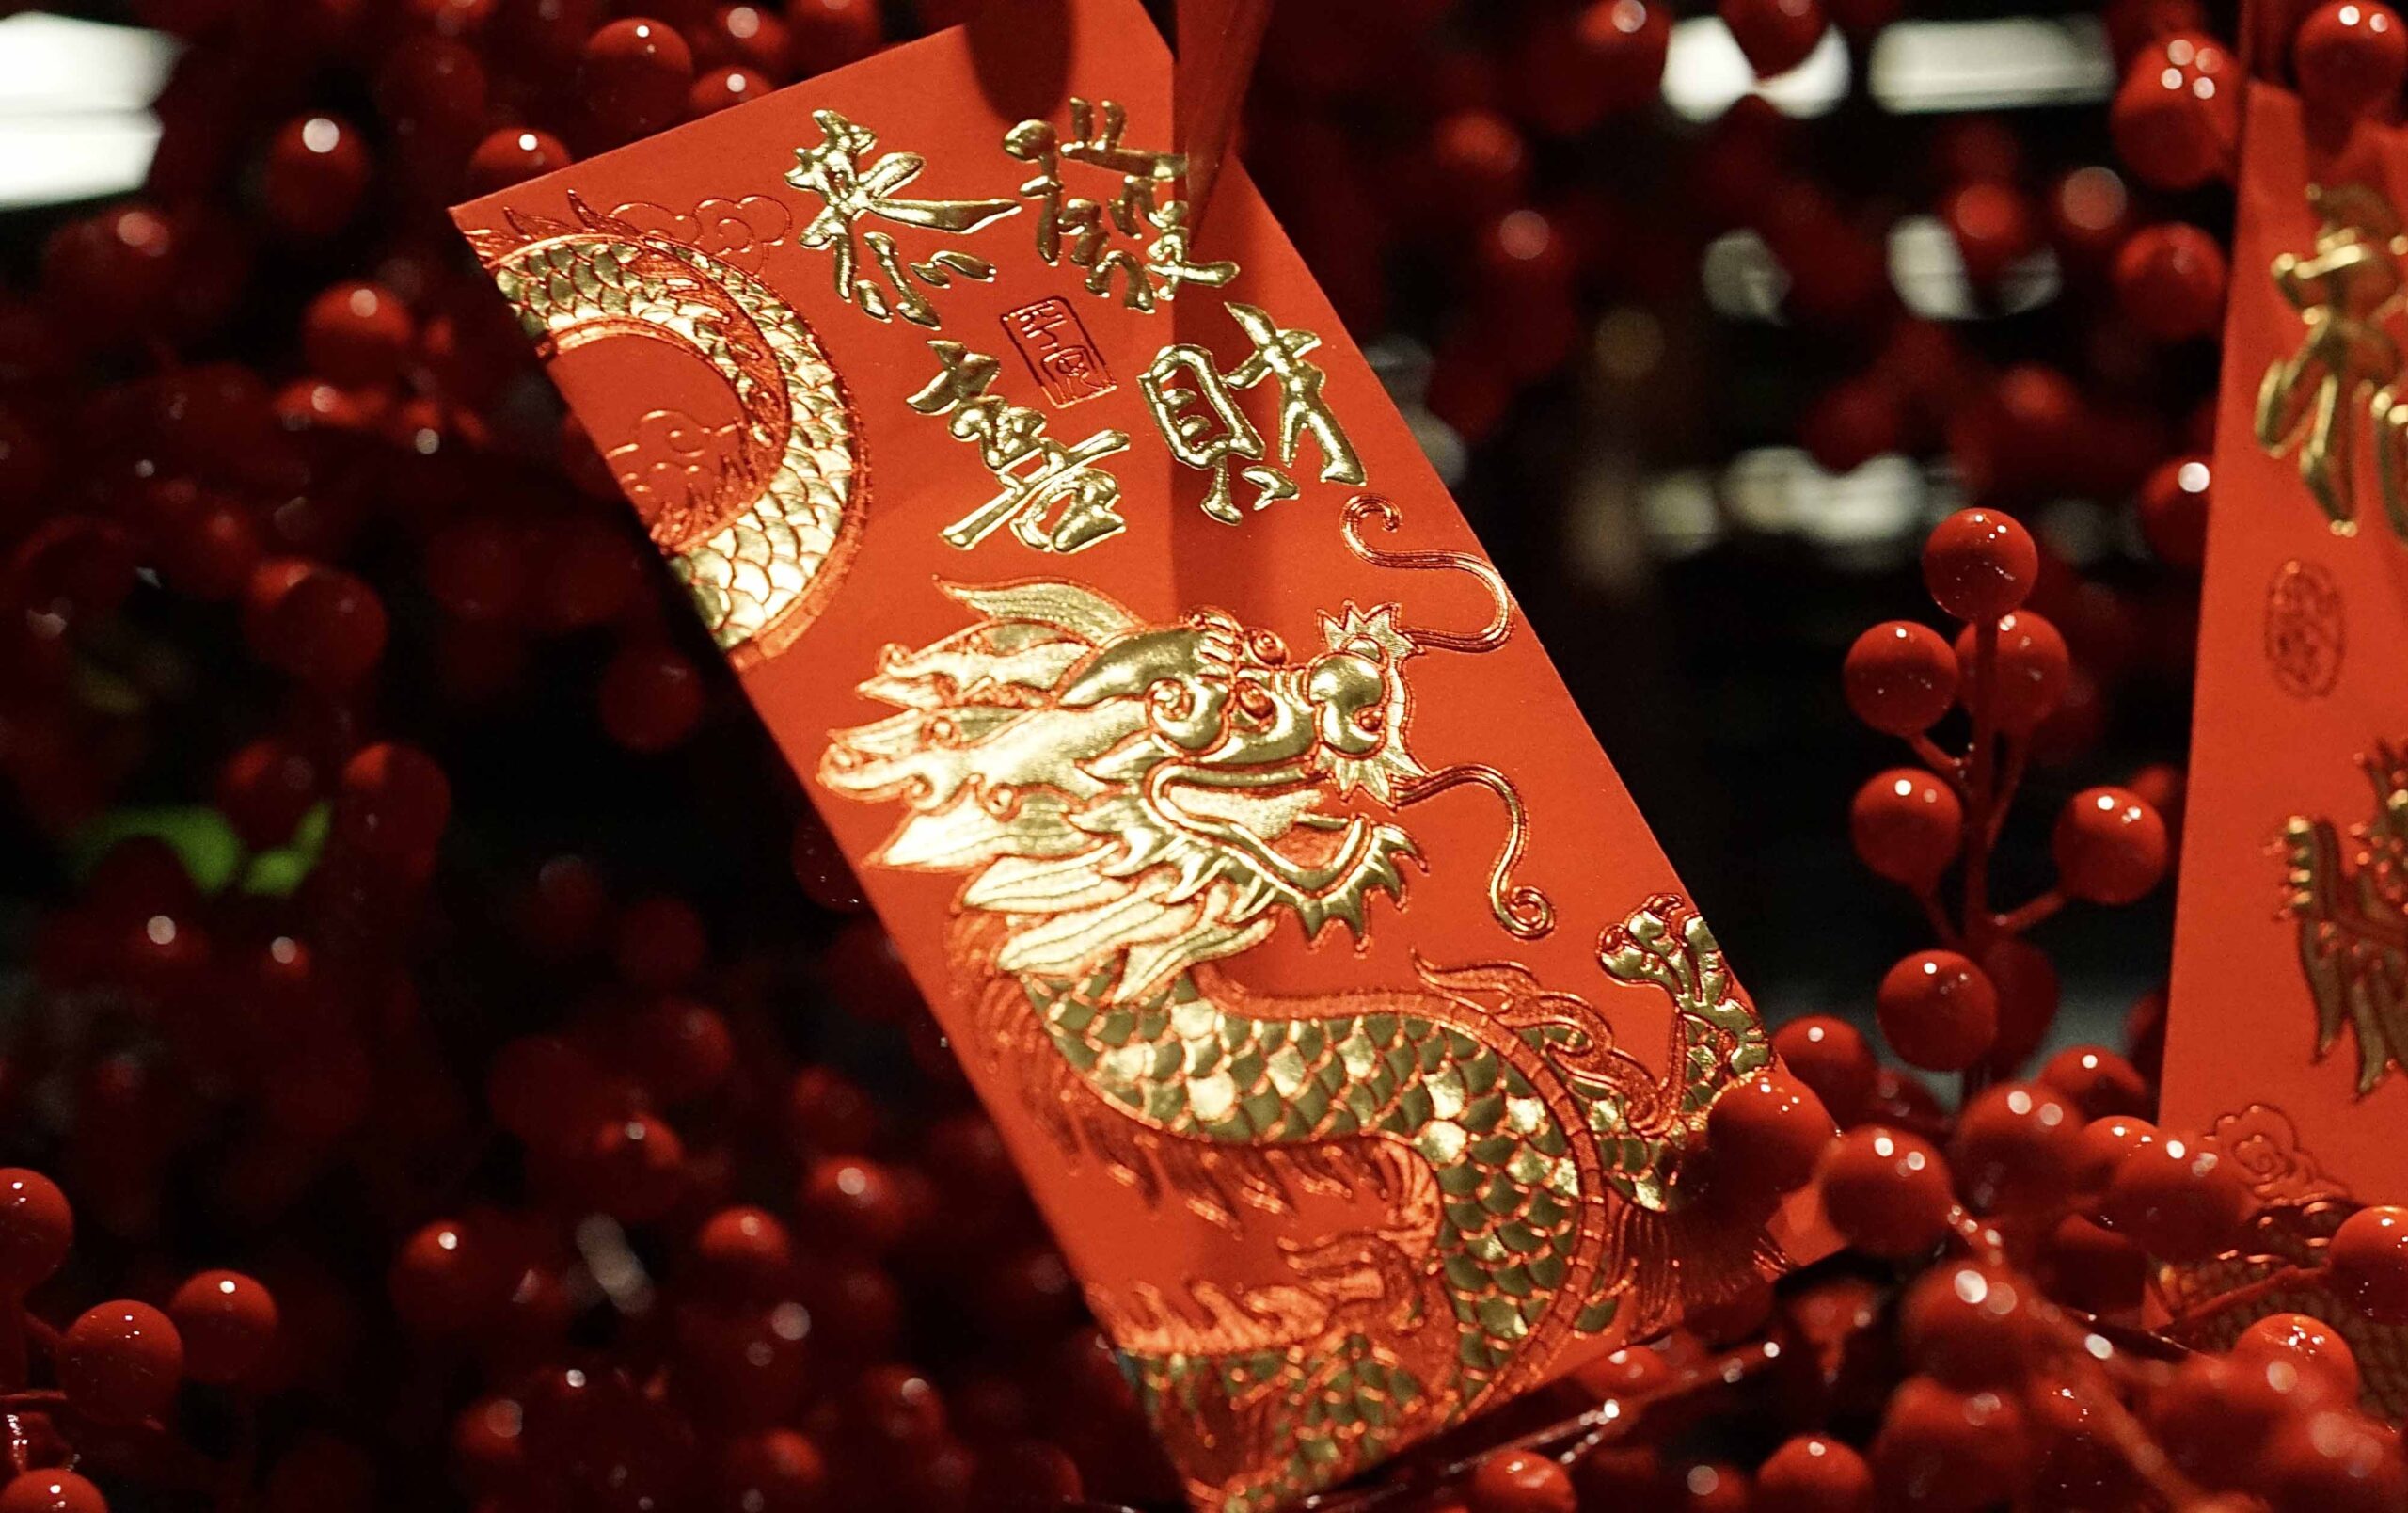 NIKU X | Lunar New Year Starts Sunday. Here's How To Celebrate The Year Of The Dragon In LA